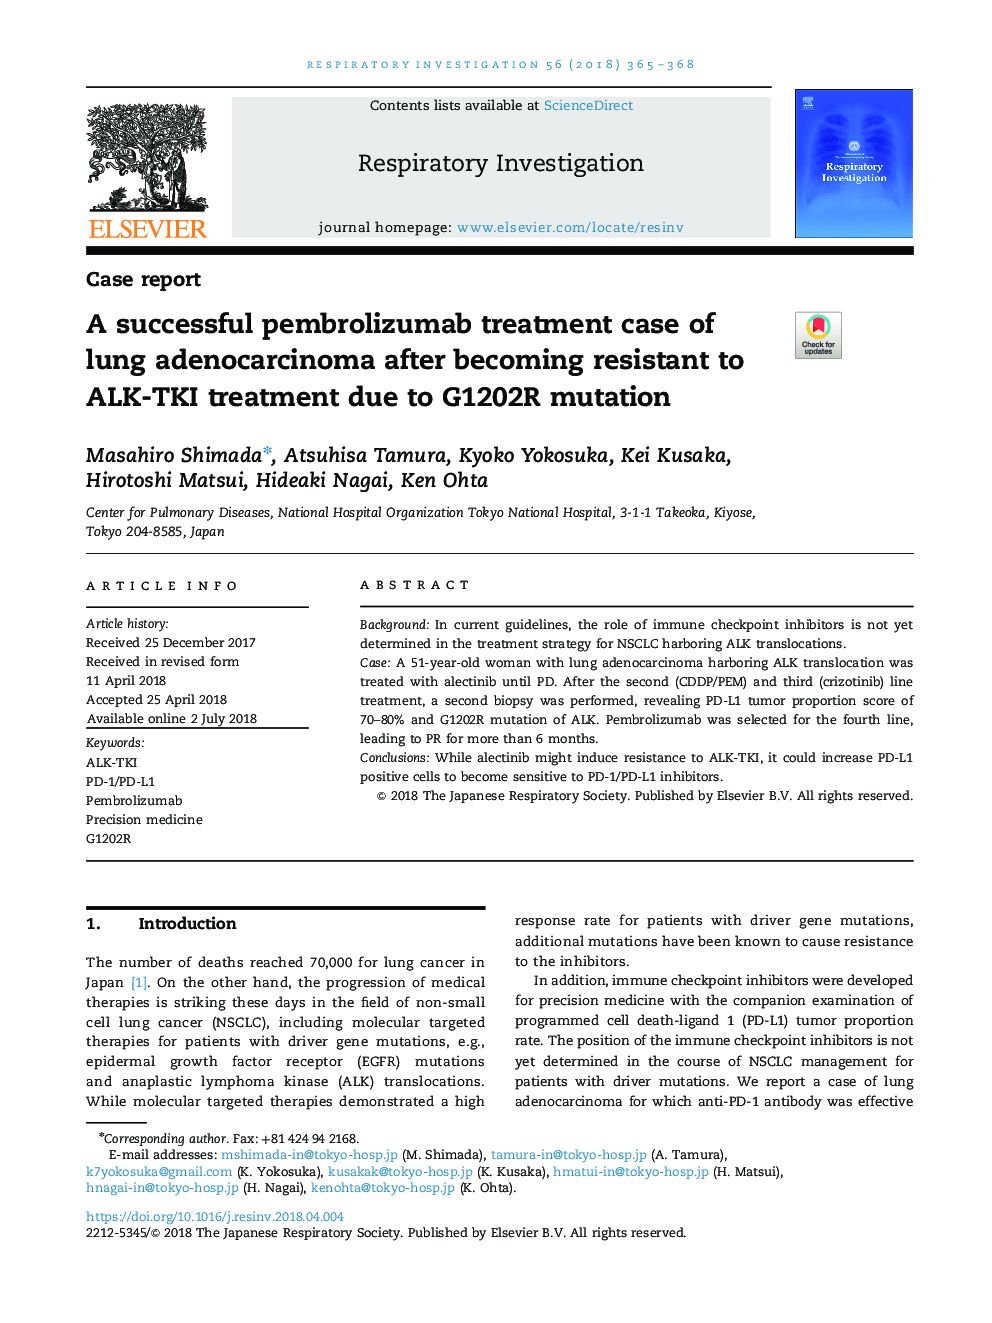 A successful pembrolizumab treatment case of lung adenocarcinoma after becoming resistant to ALK-TKI treatment due to G1202R mutation